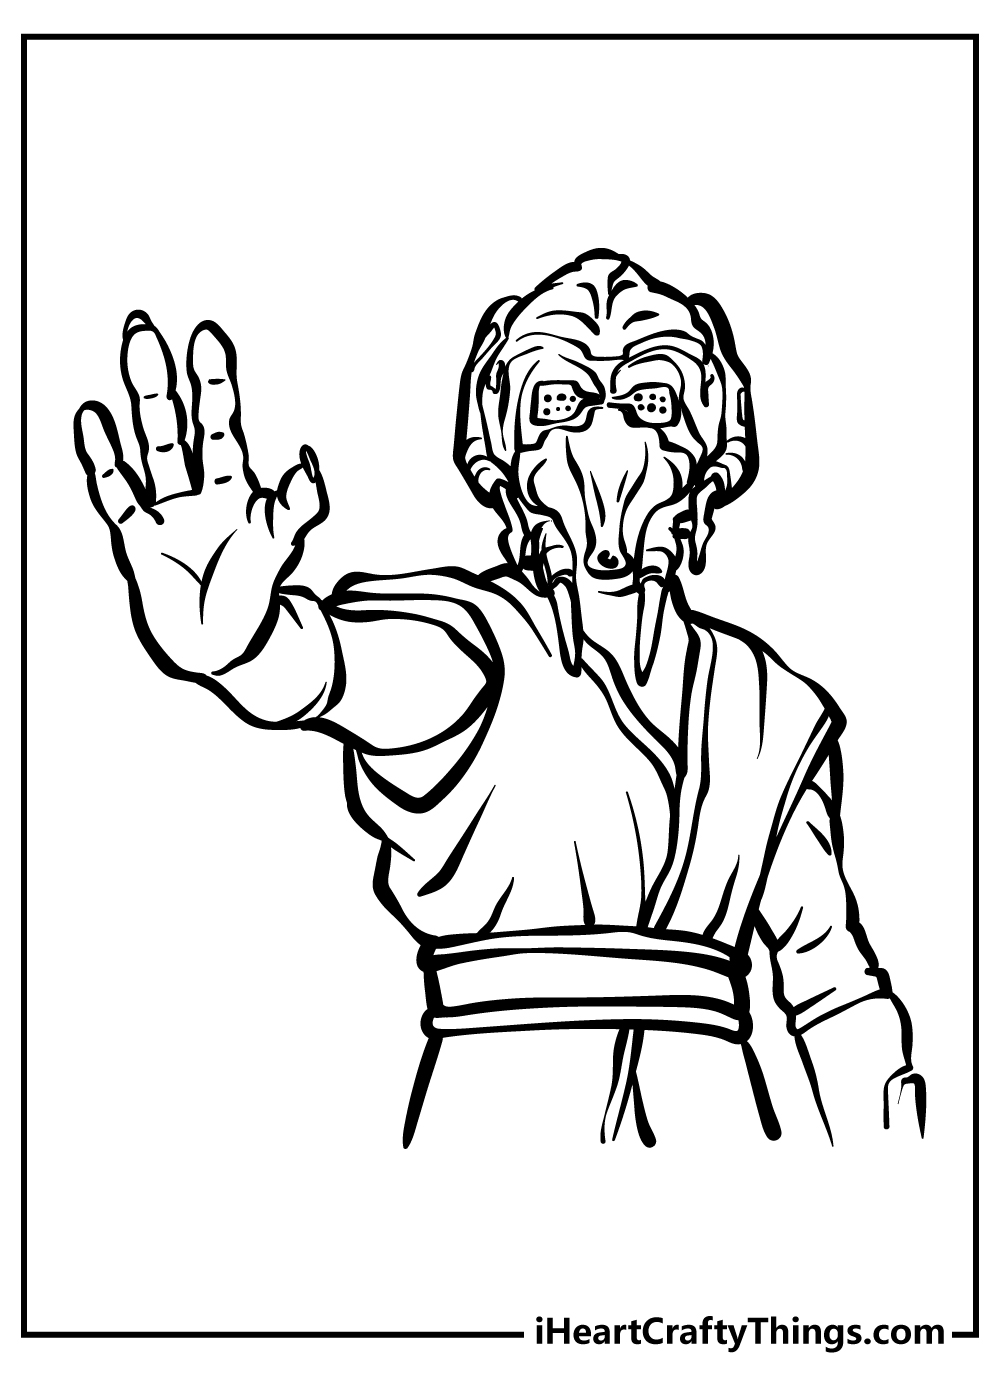 Star Wars Coloring Book for kids free printable